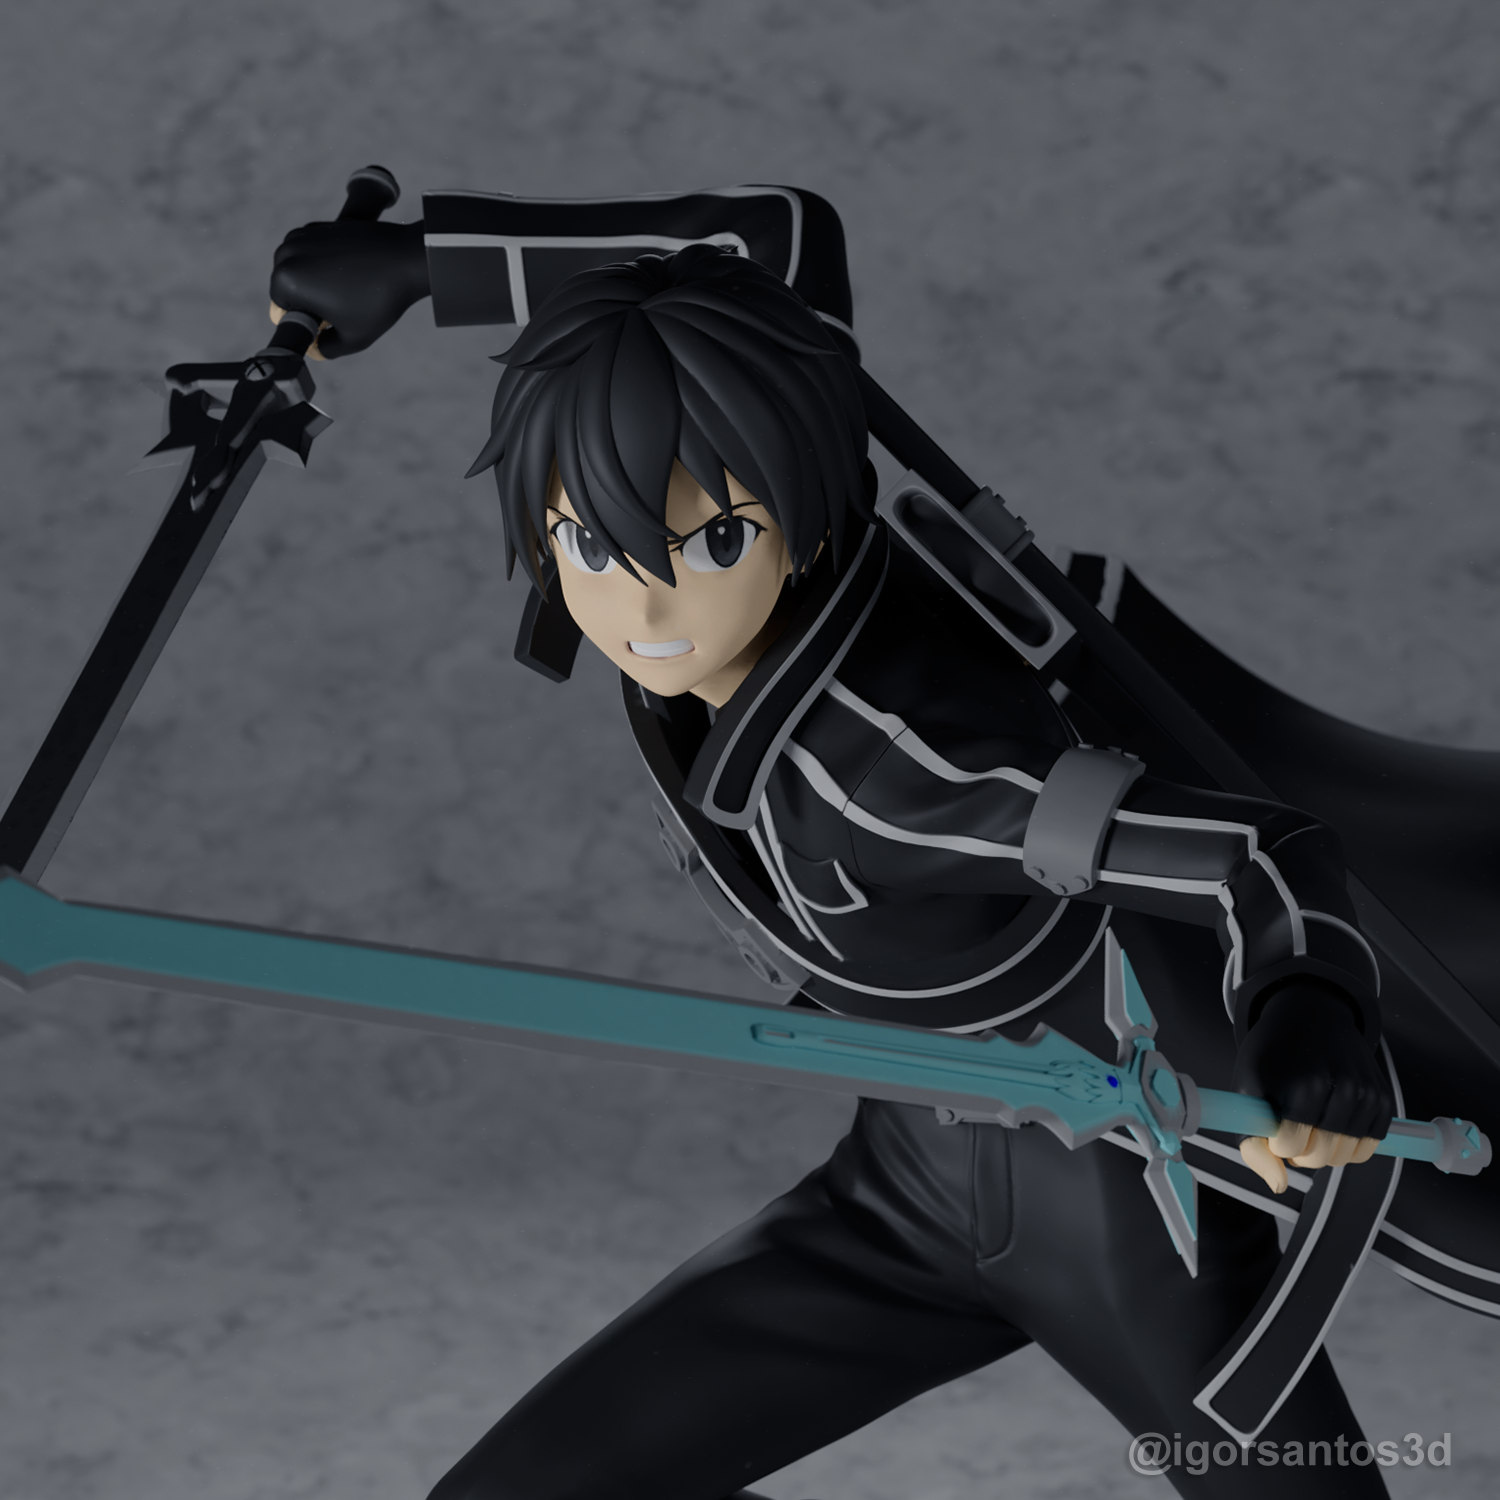 dimple sweet recommends Sword Art Online Pictures Of Kirito